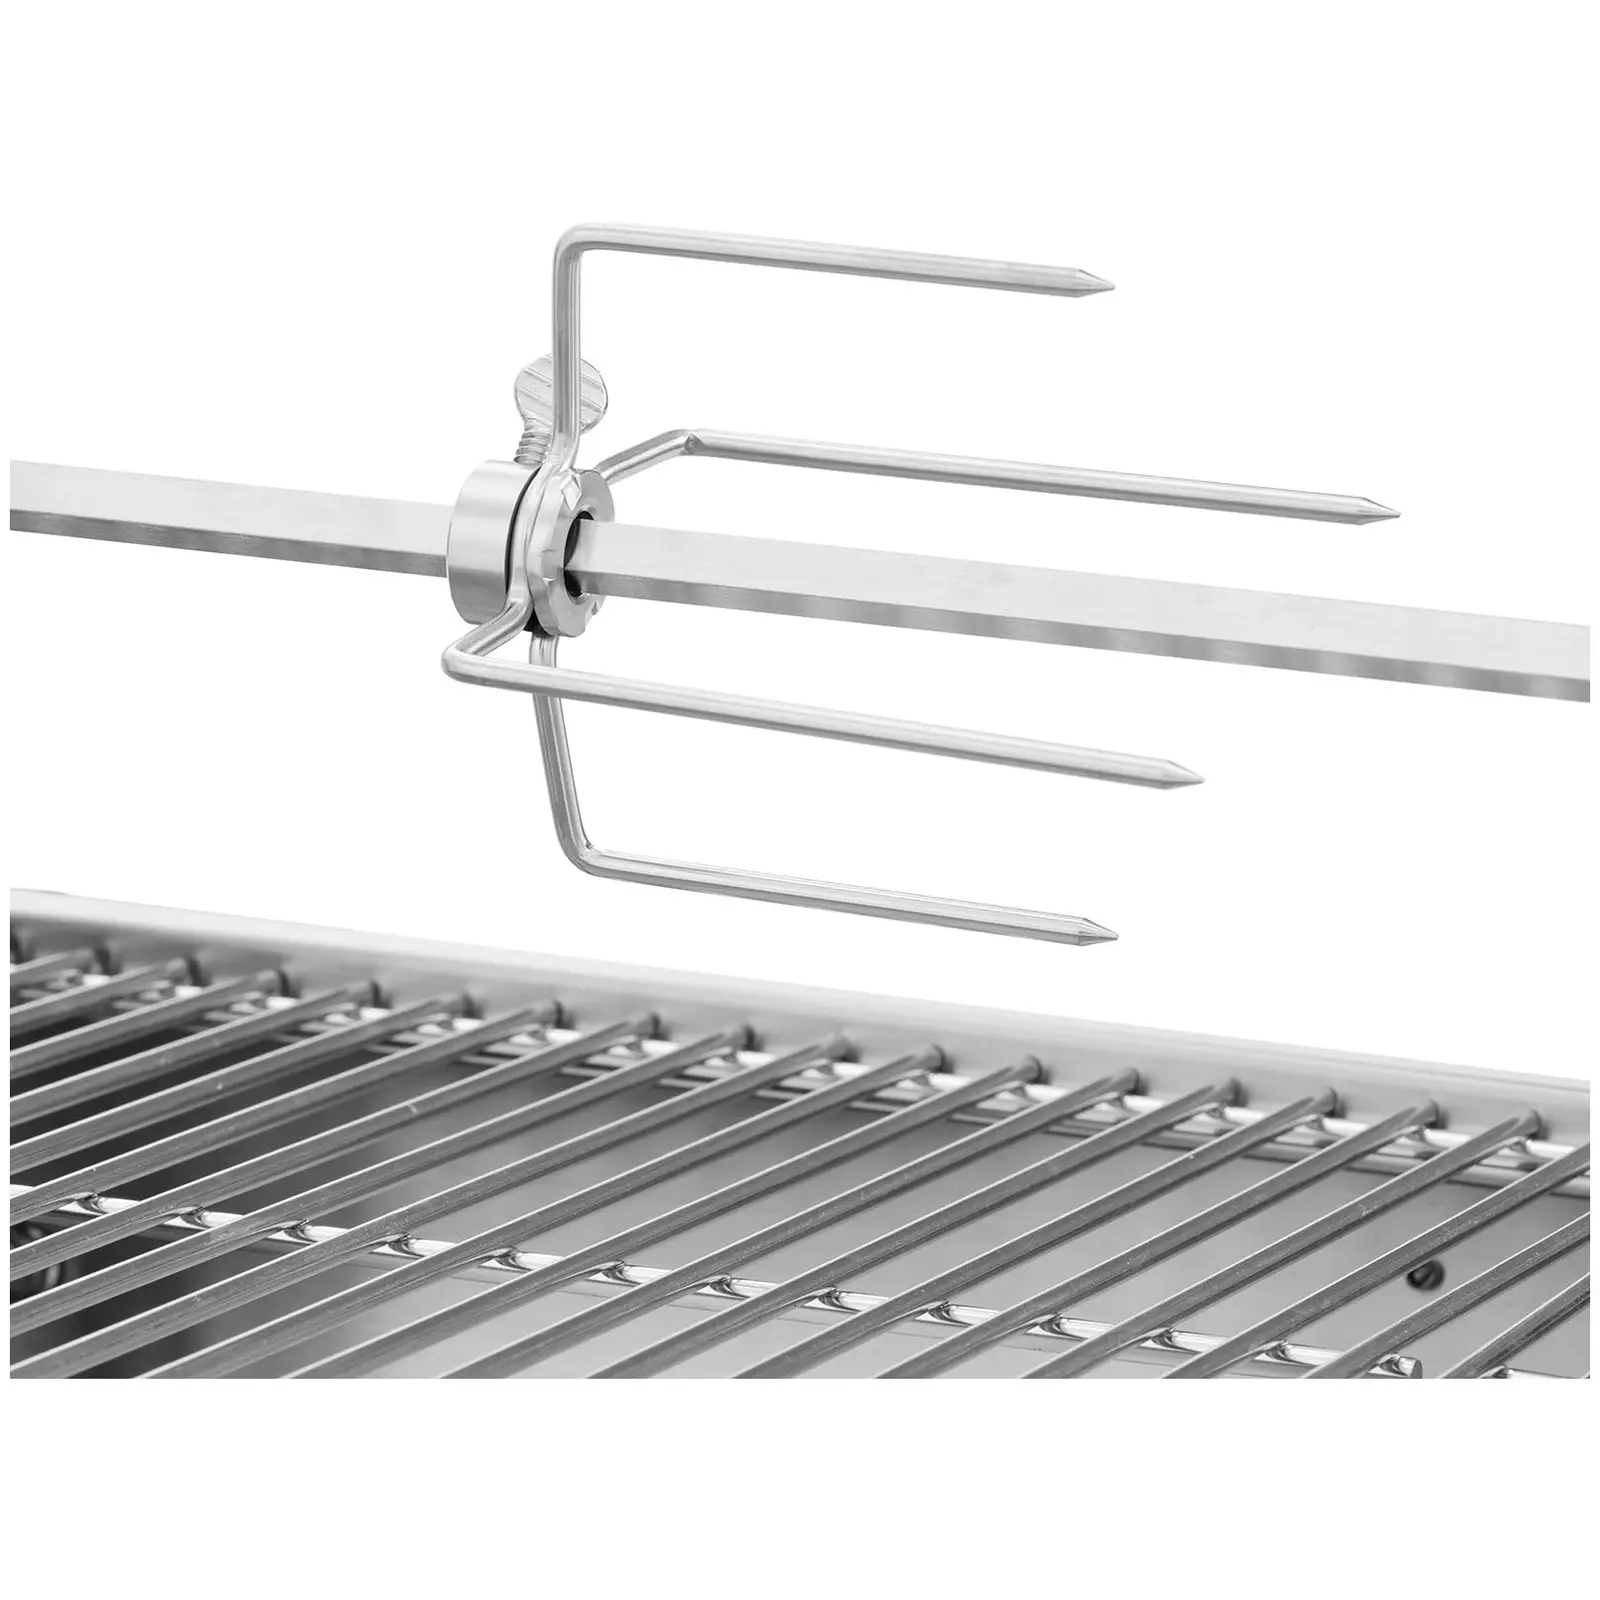 Roasting Spit - with motor - 15 kg - stainless steel - grill spit length: 82 cm